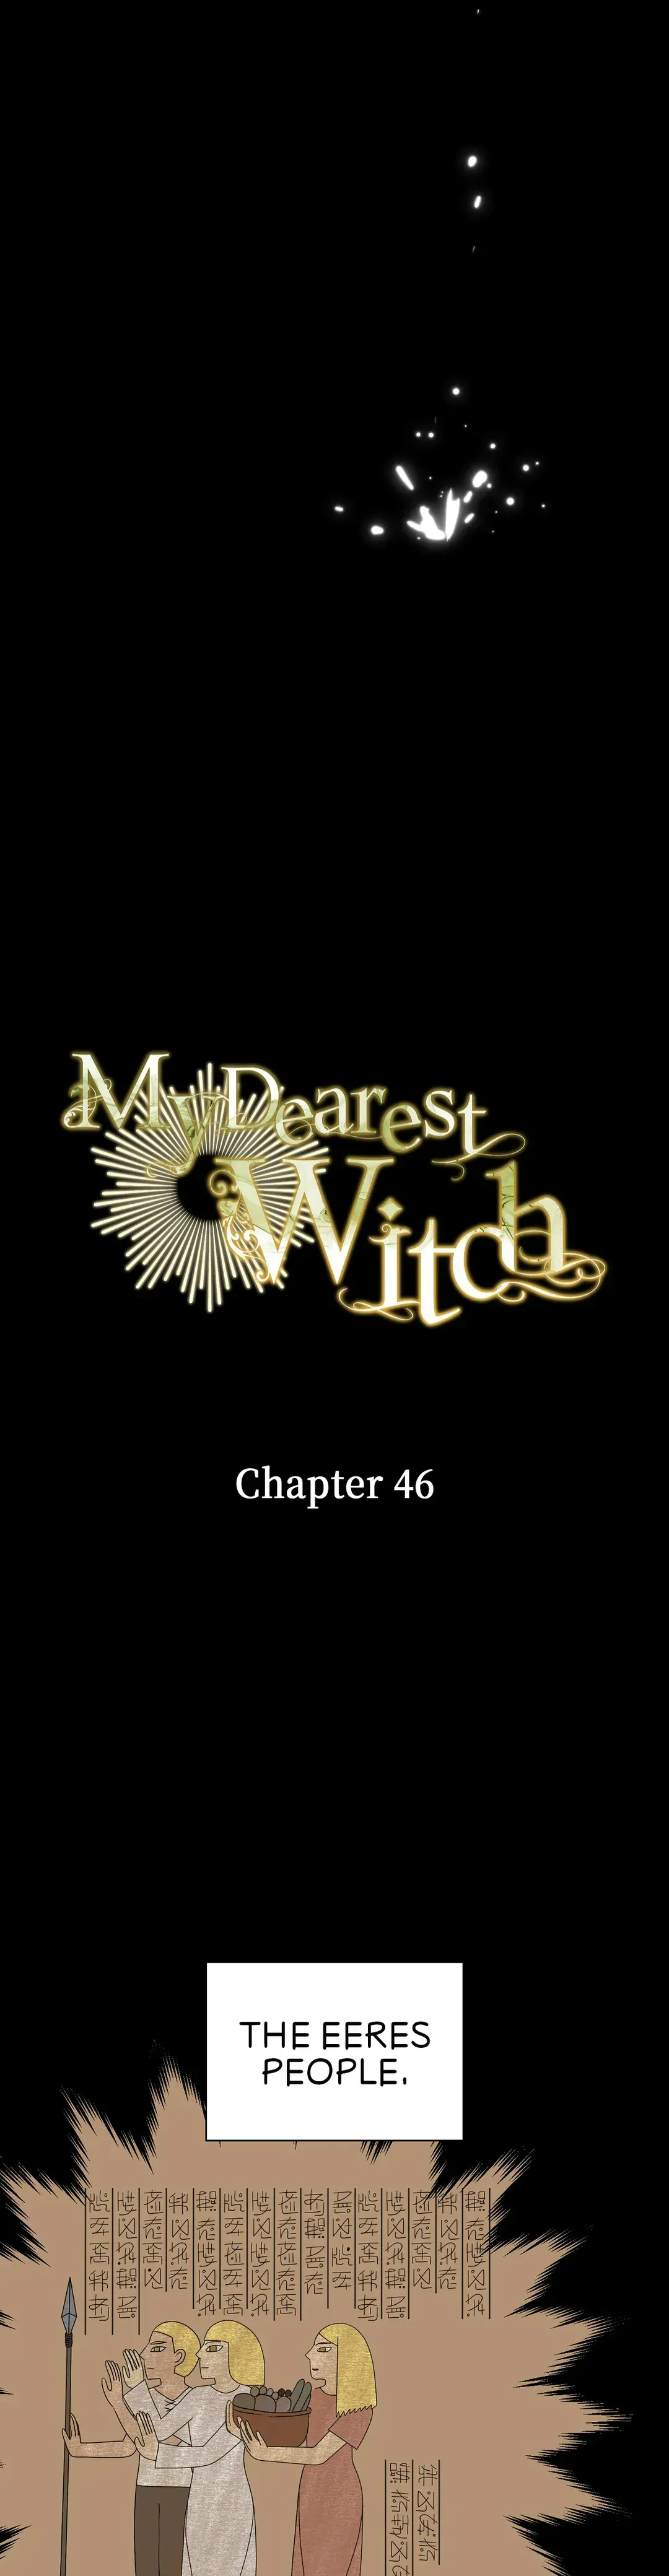 My Dearest Witch chapter 46